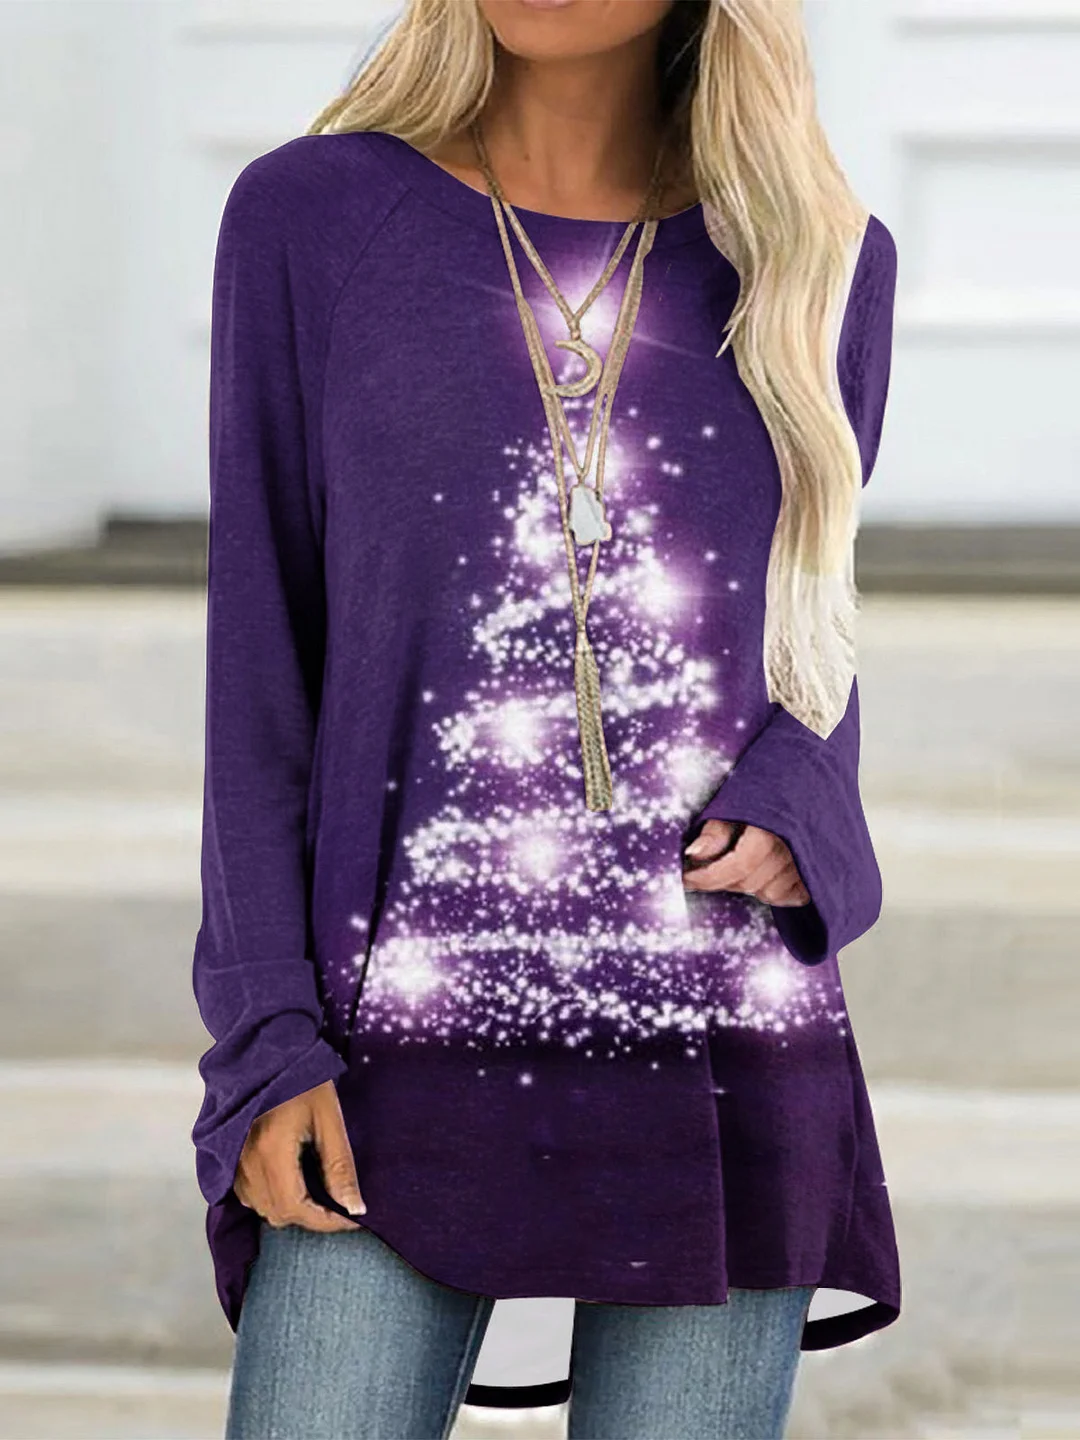 Women's Christmas Graphic Solid Color Scoop Neck Long Sleeve Top